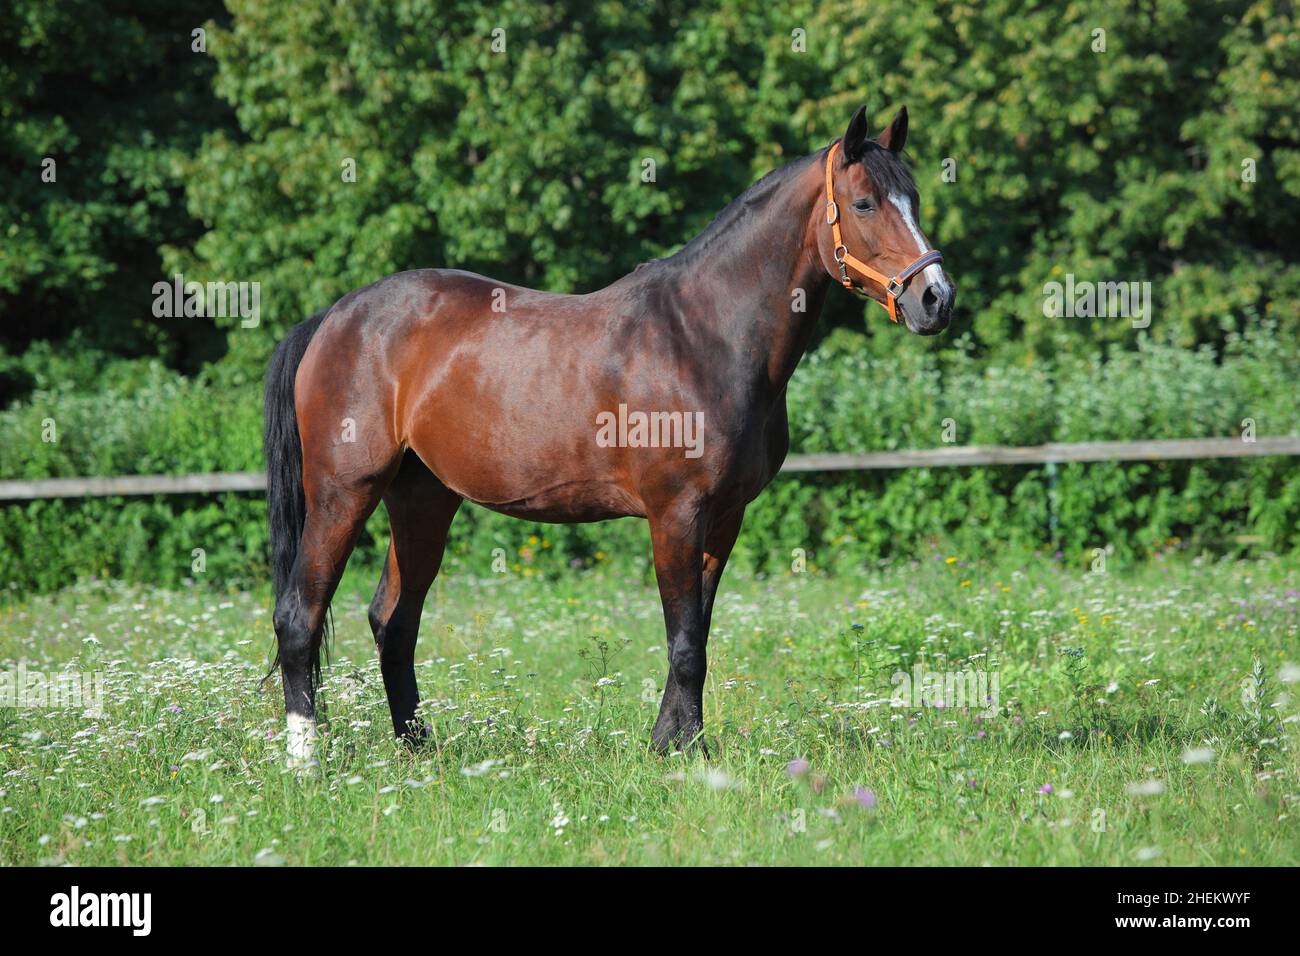 Dressage sportive horse portrait in green forest glade background Stock Photo